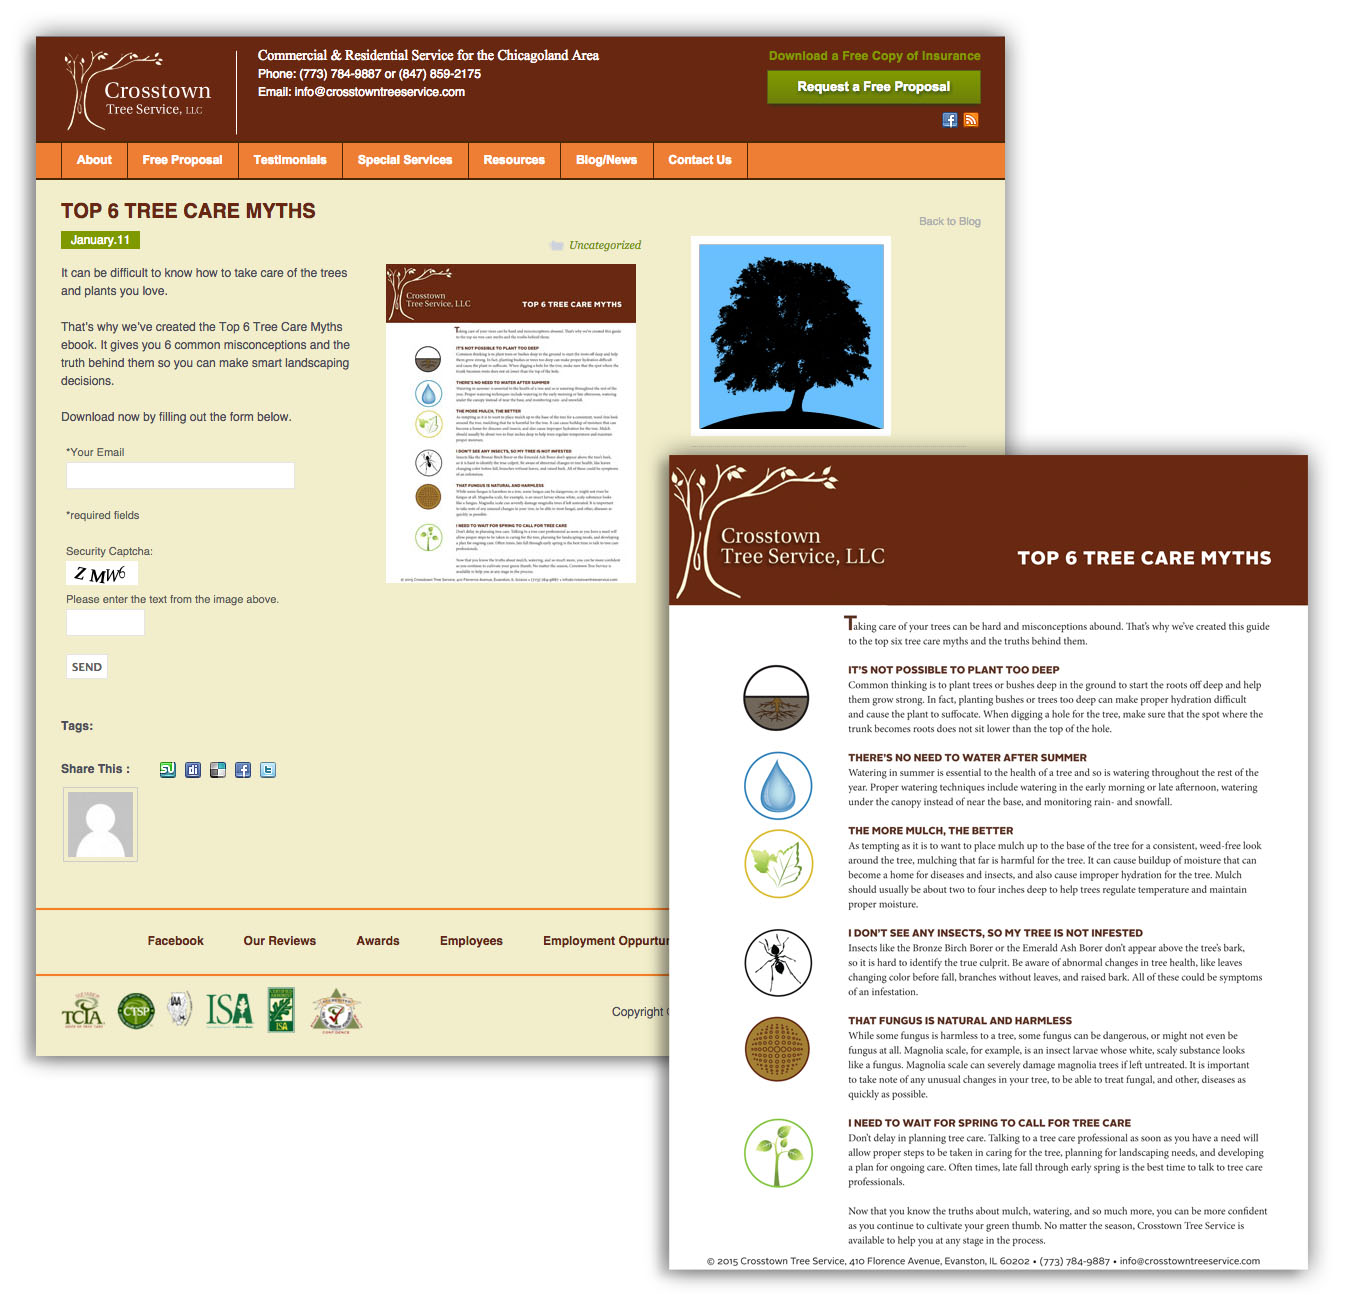 Top 6 Tree Care Myths eBook and Landing Page